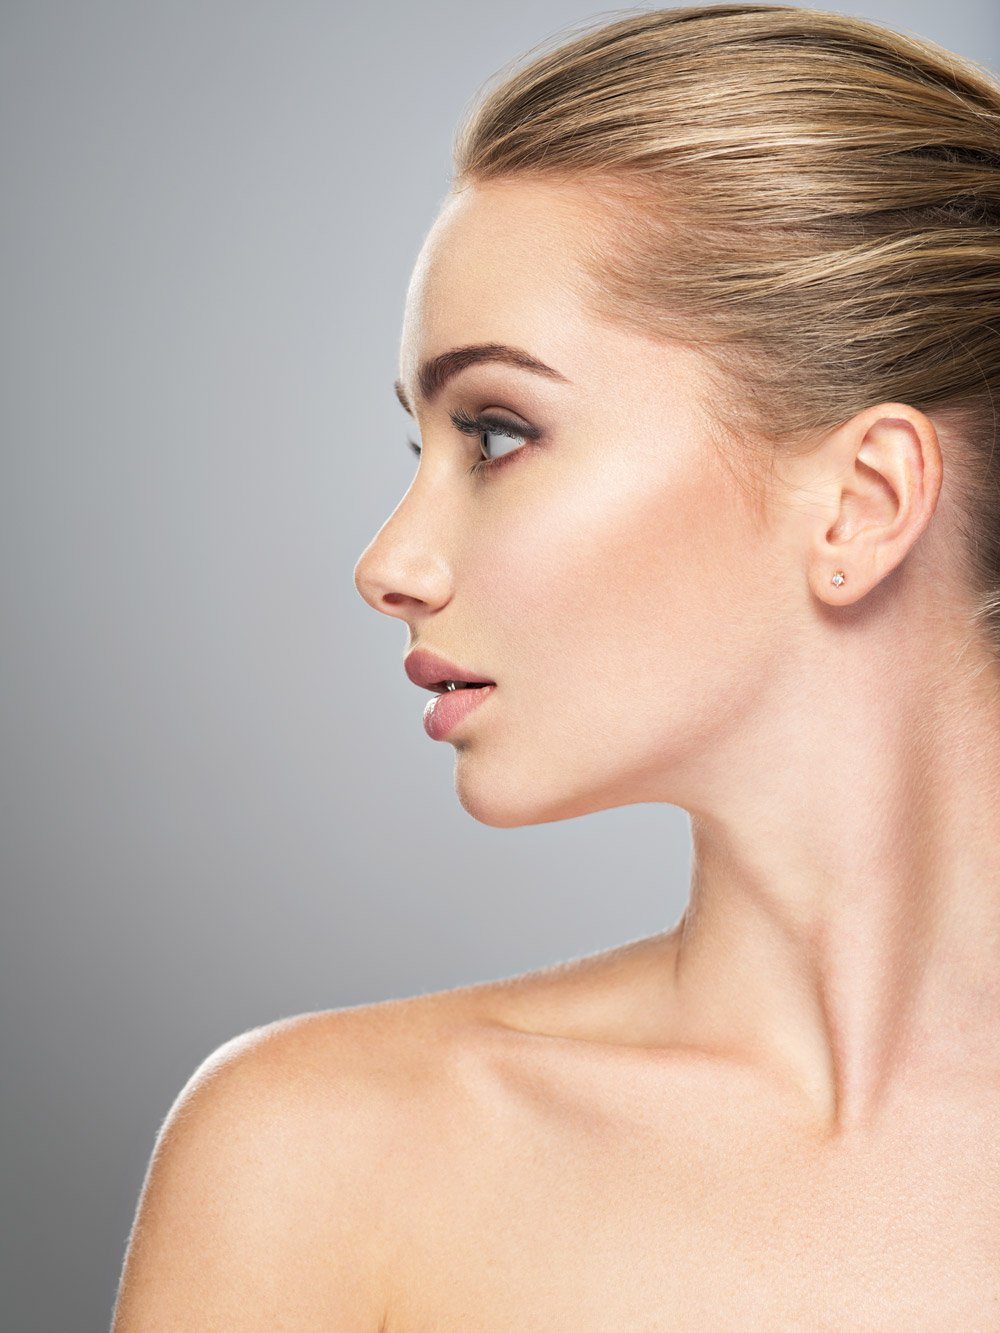 Profile face of young woman, skin care treatment. Side view of beautiful girl with healthy skin of the face